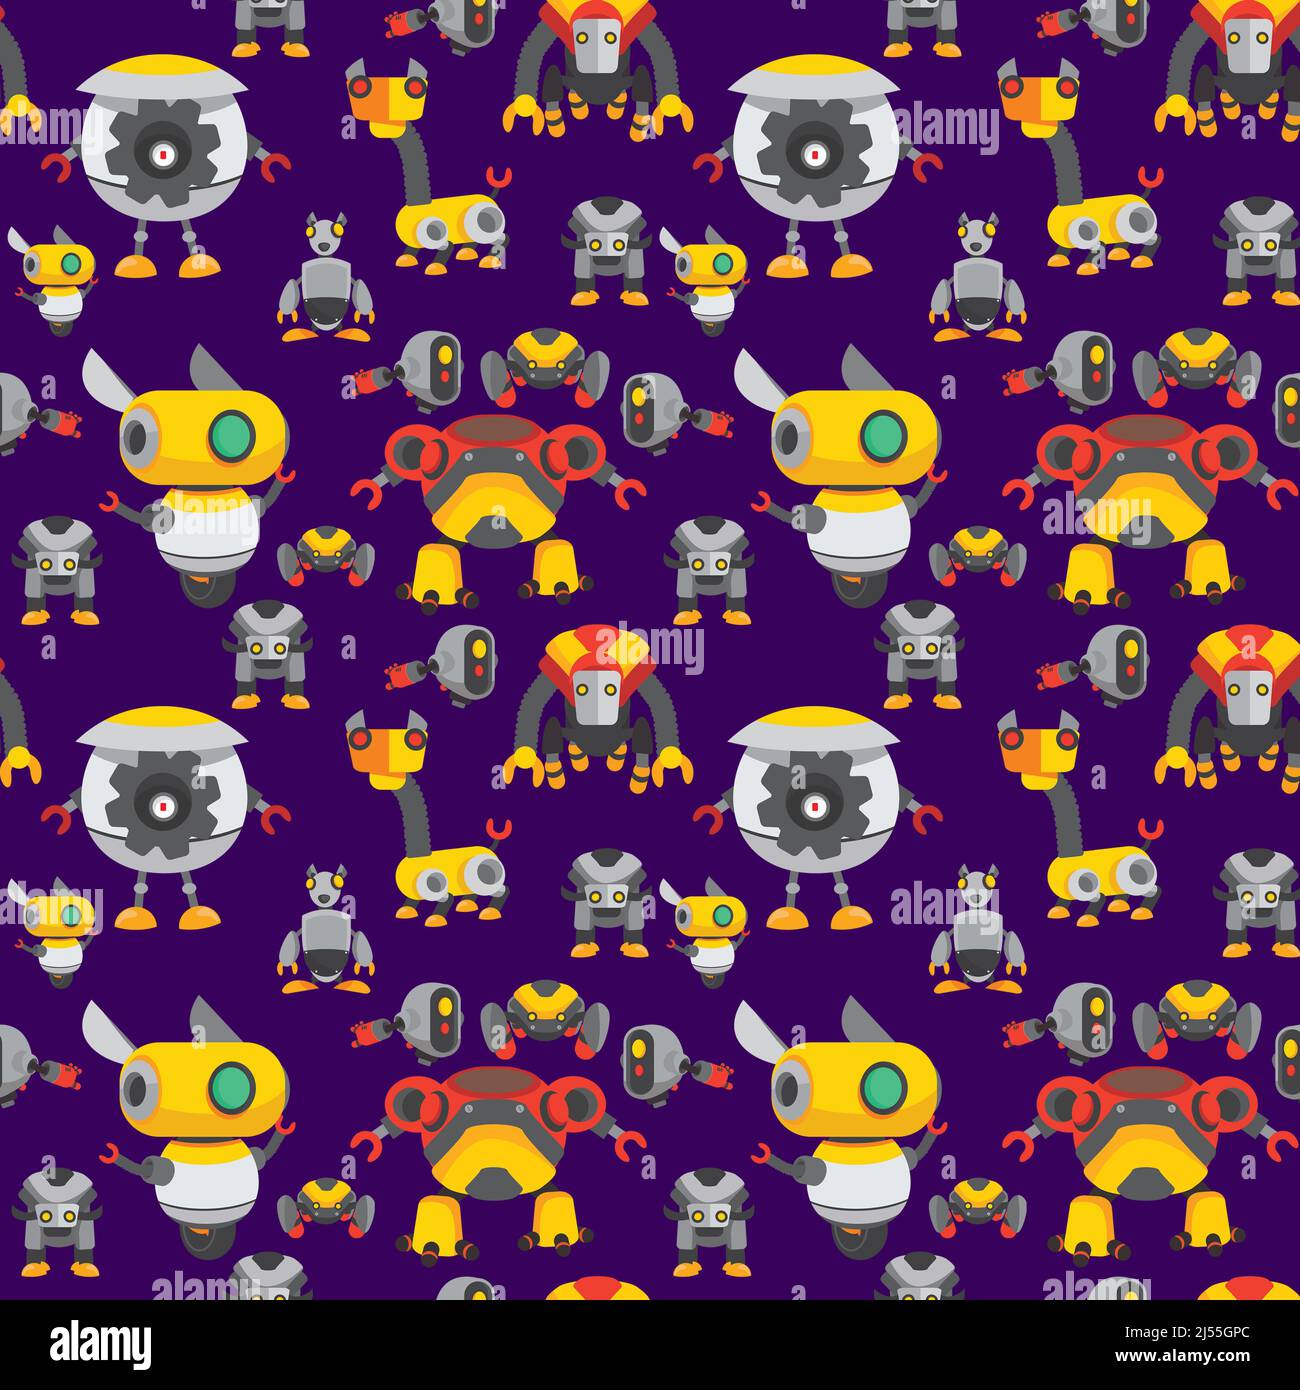 Robot repeating pattern purple background for robotics fans with cool little machines. Stock Photo